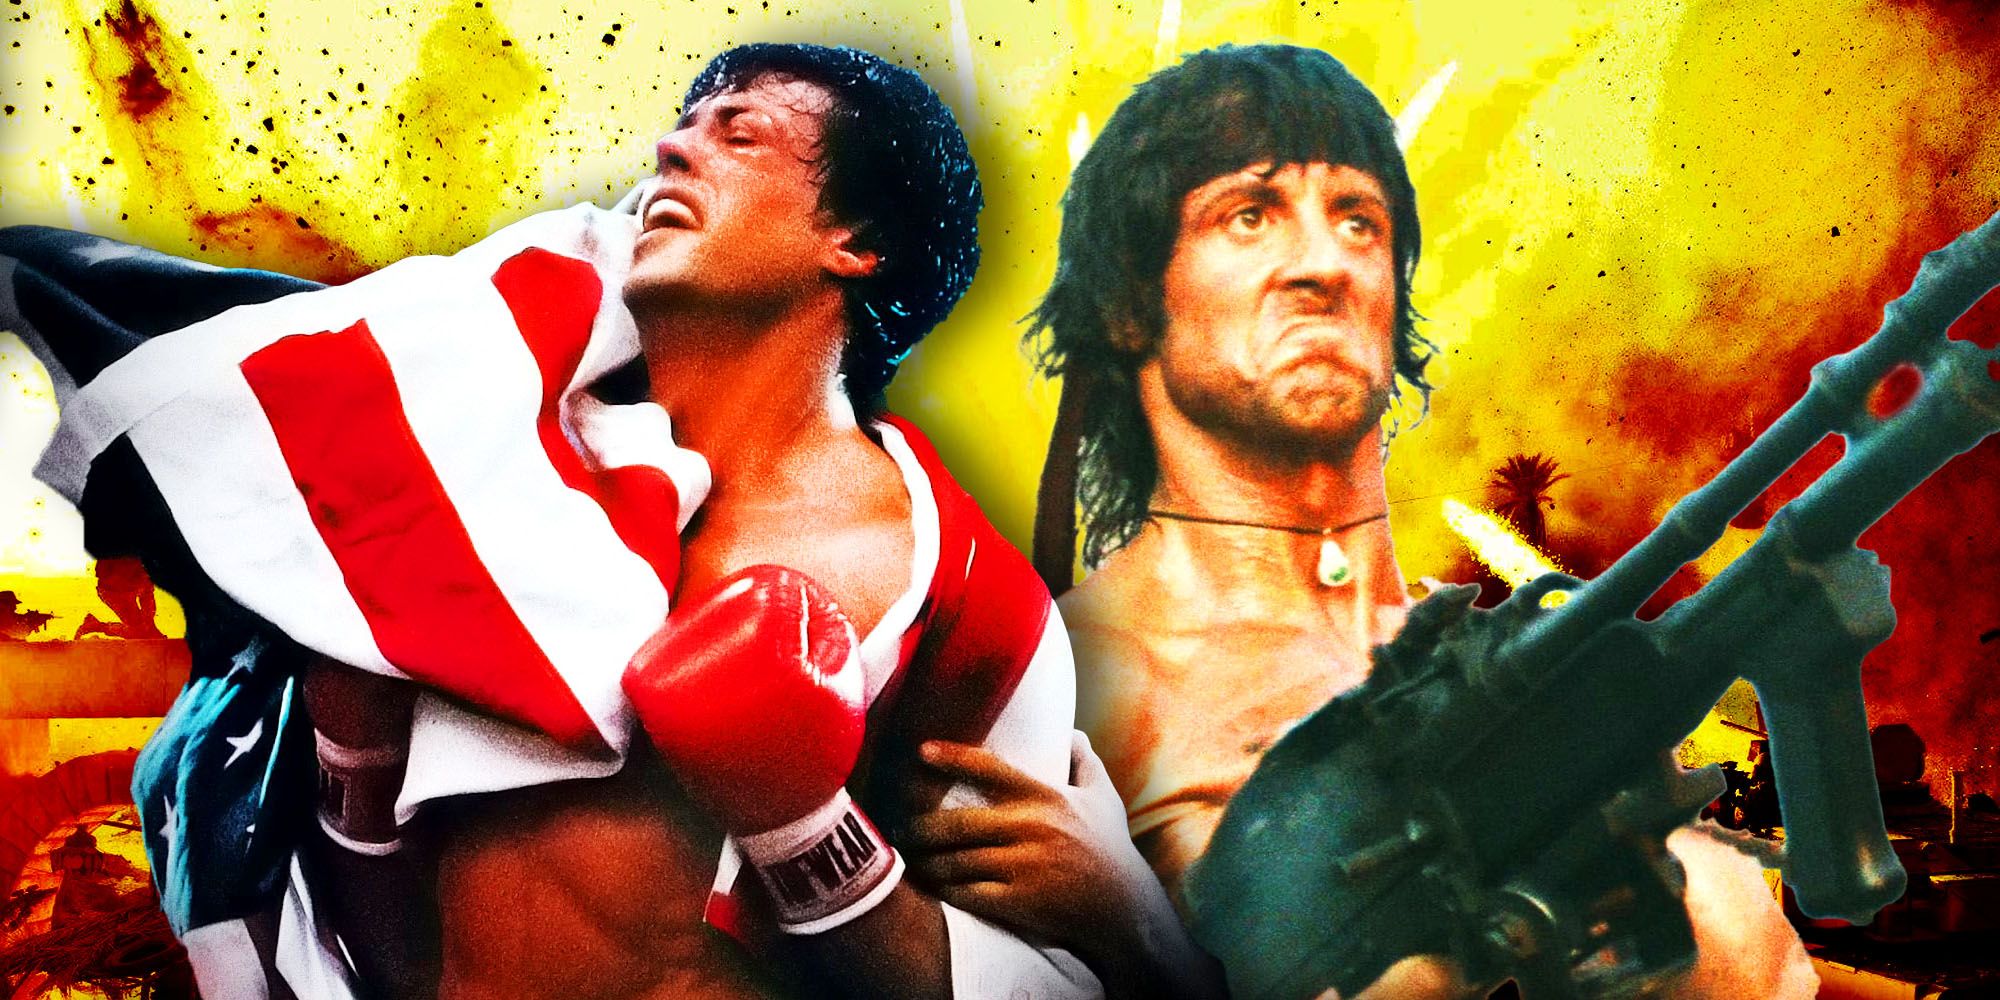 rocky-rambo-sequels-sylvester-stallone-1985-record-box-office-gross